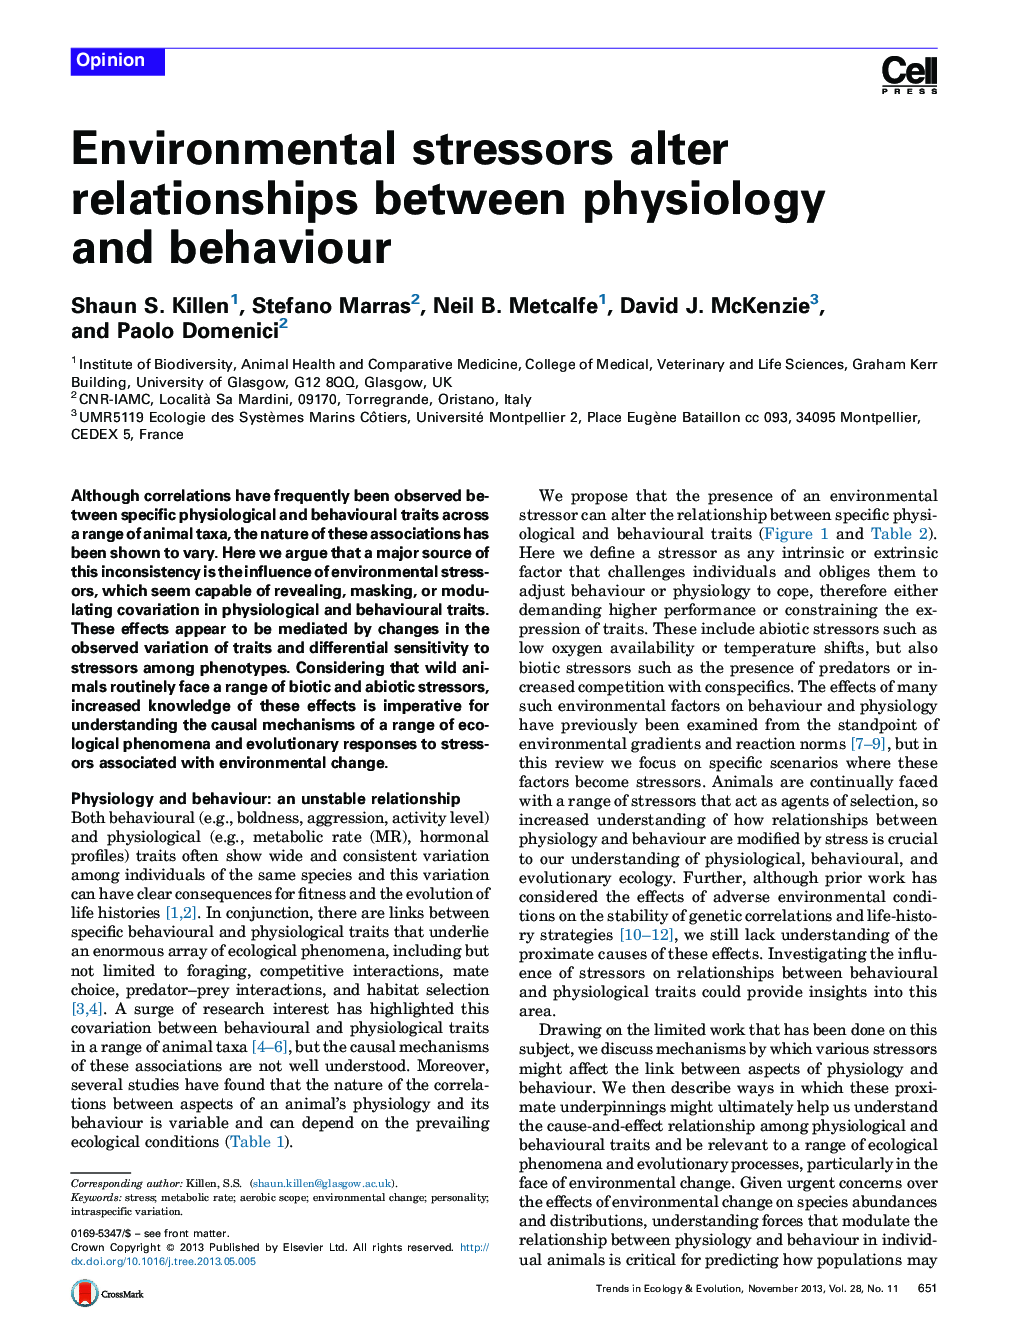 Environmental stressors alter relationships between physiology and behaviour